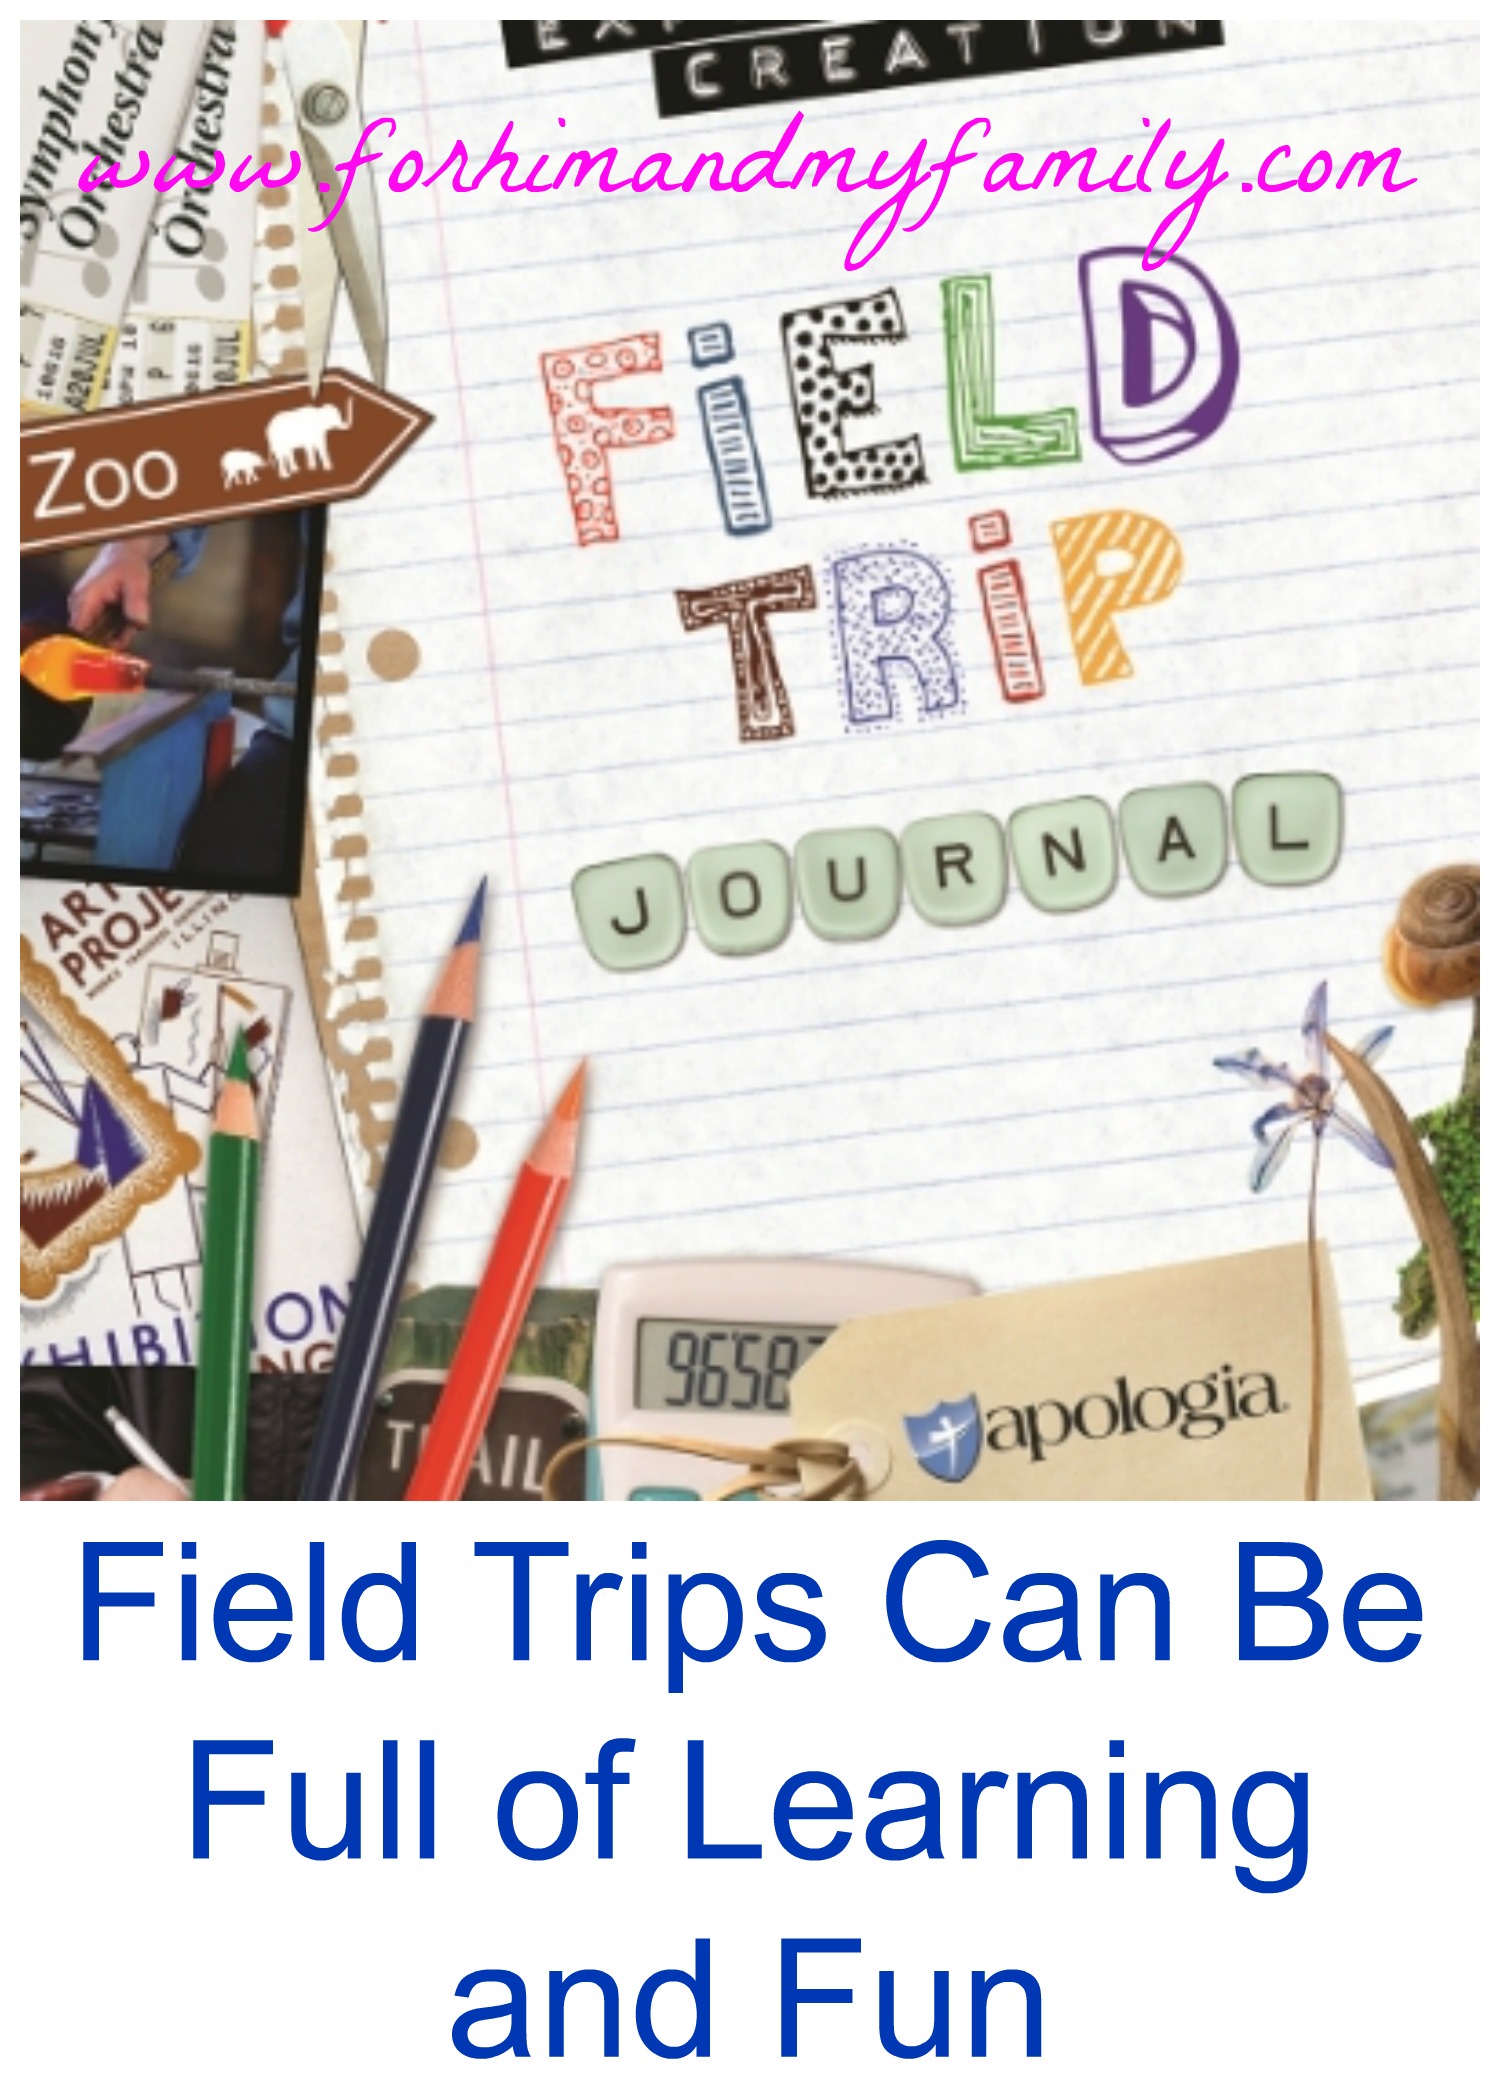 Field trips can be full of learning and fun -Apologia Exploring Creation Field Trip Journal